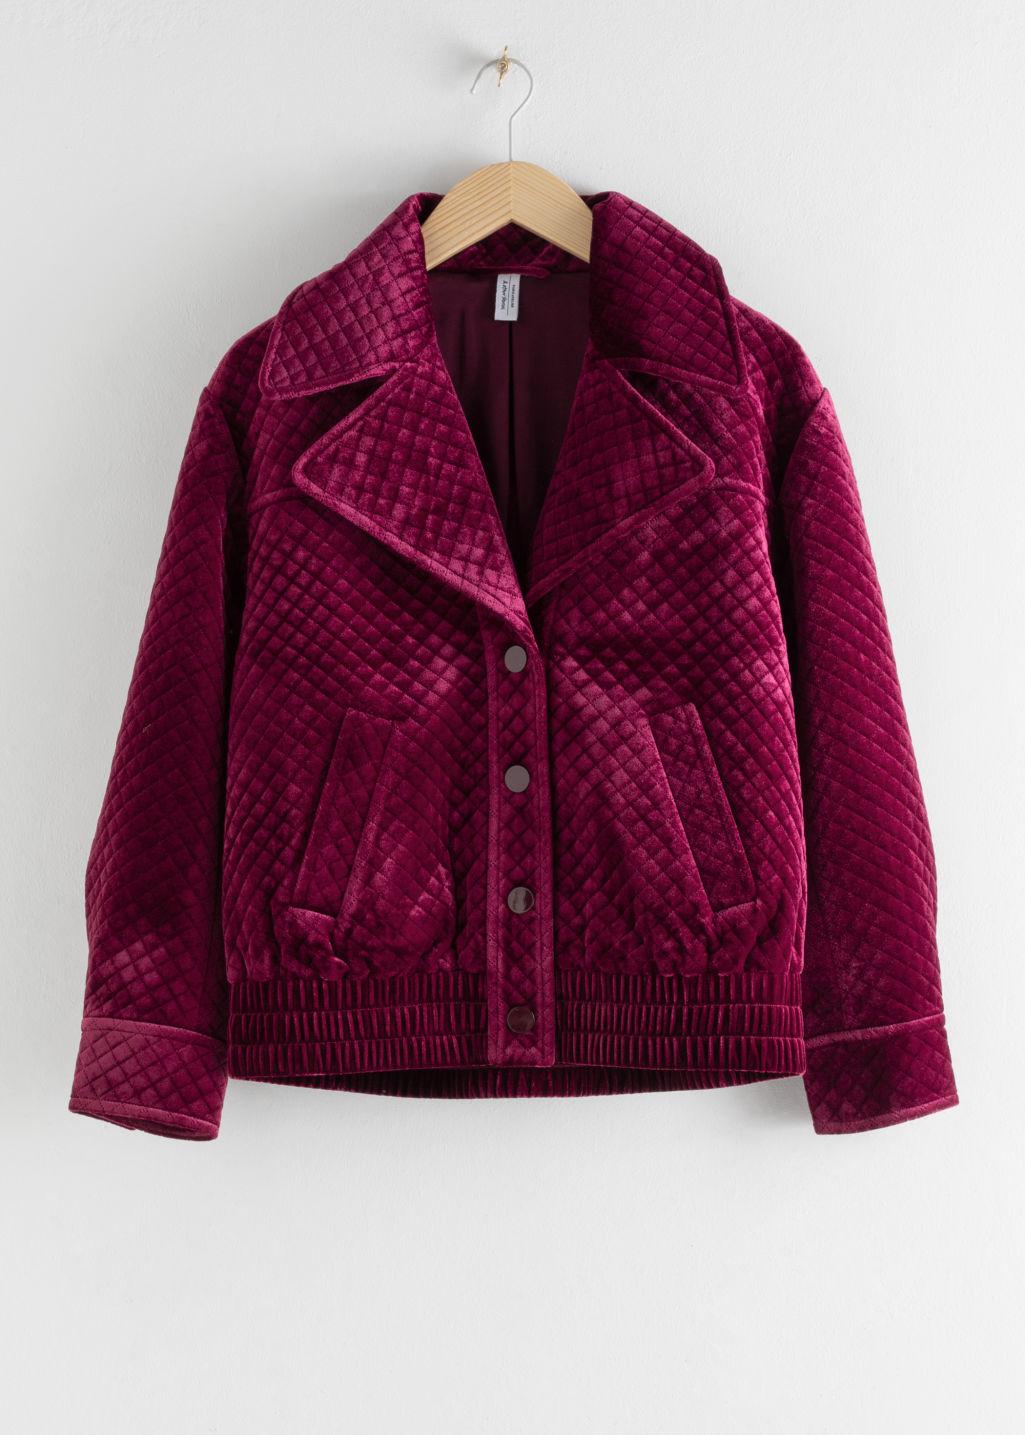 & Other Stories Quilted Velour Jacket in Pink | Lyst